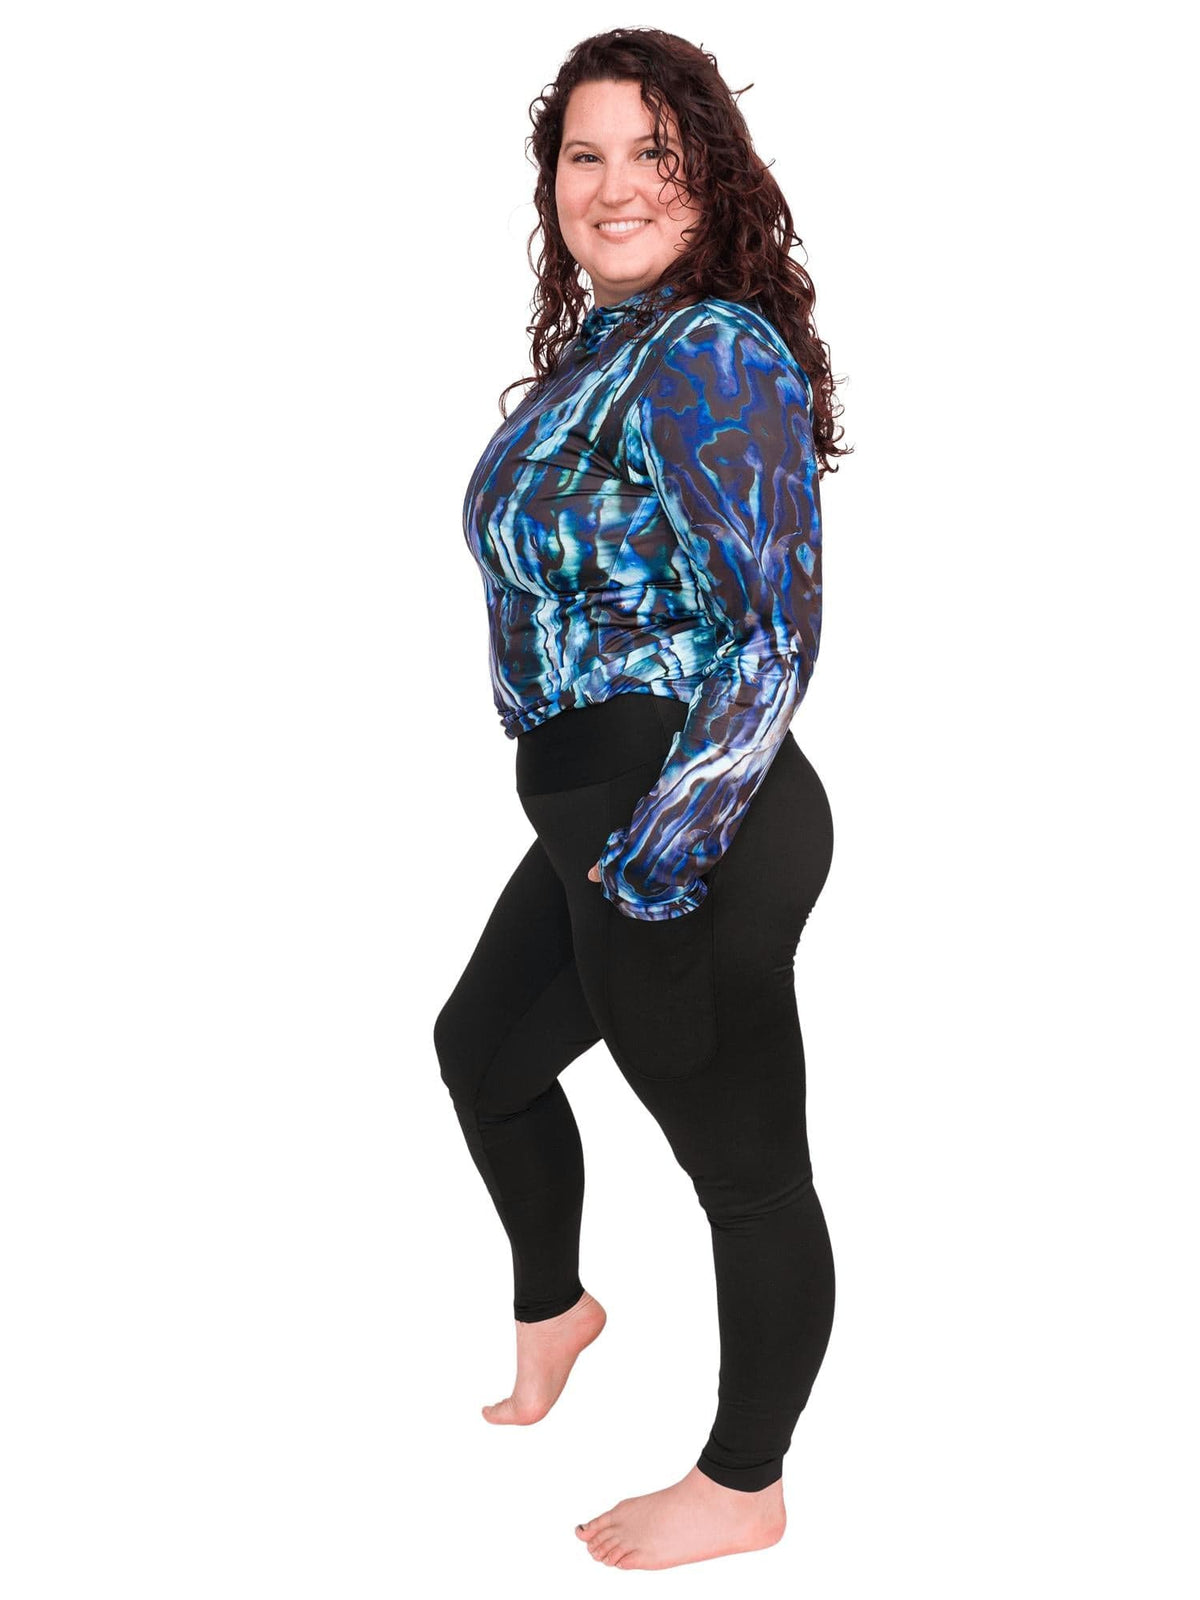 Model: Kela is a marine conservationist who strives to connect students with educational opportunities to help expand the reach of the marine science field. She is 5’5”, 185 lbs, 36F and is wearing a size XL sun shirt and legging.